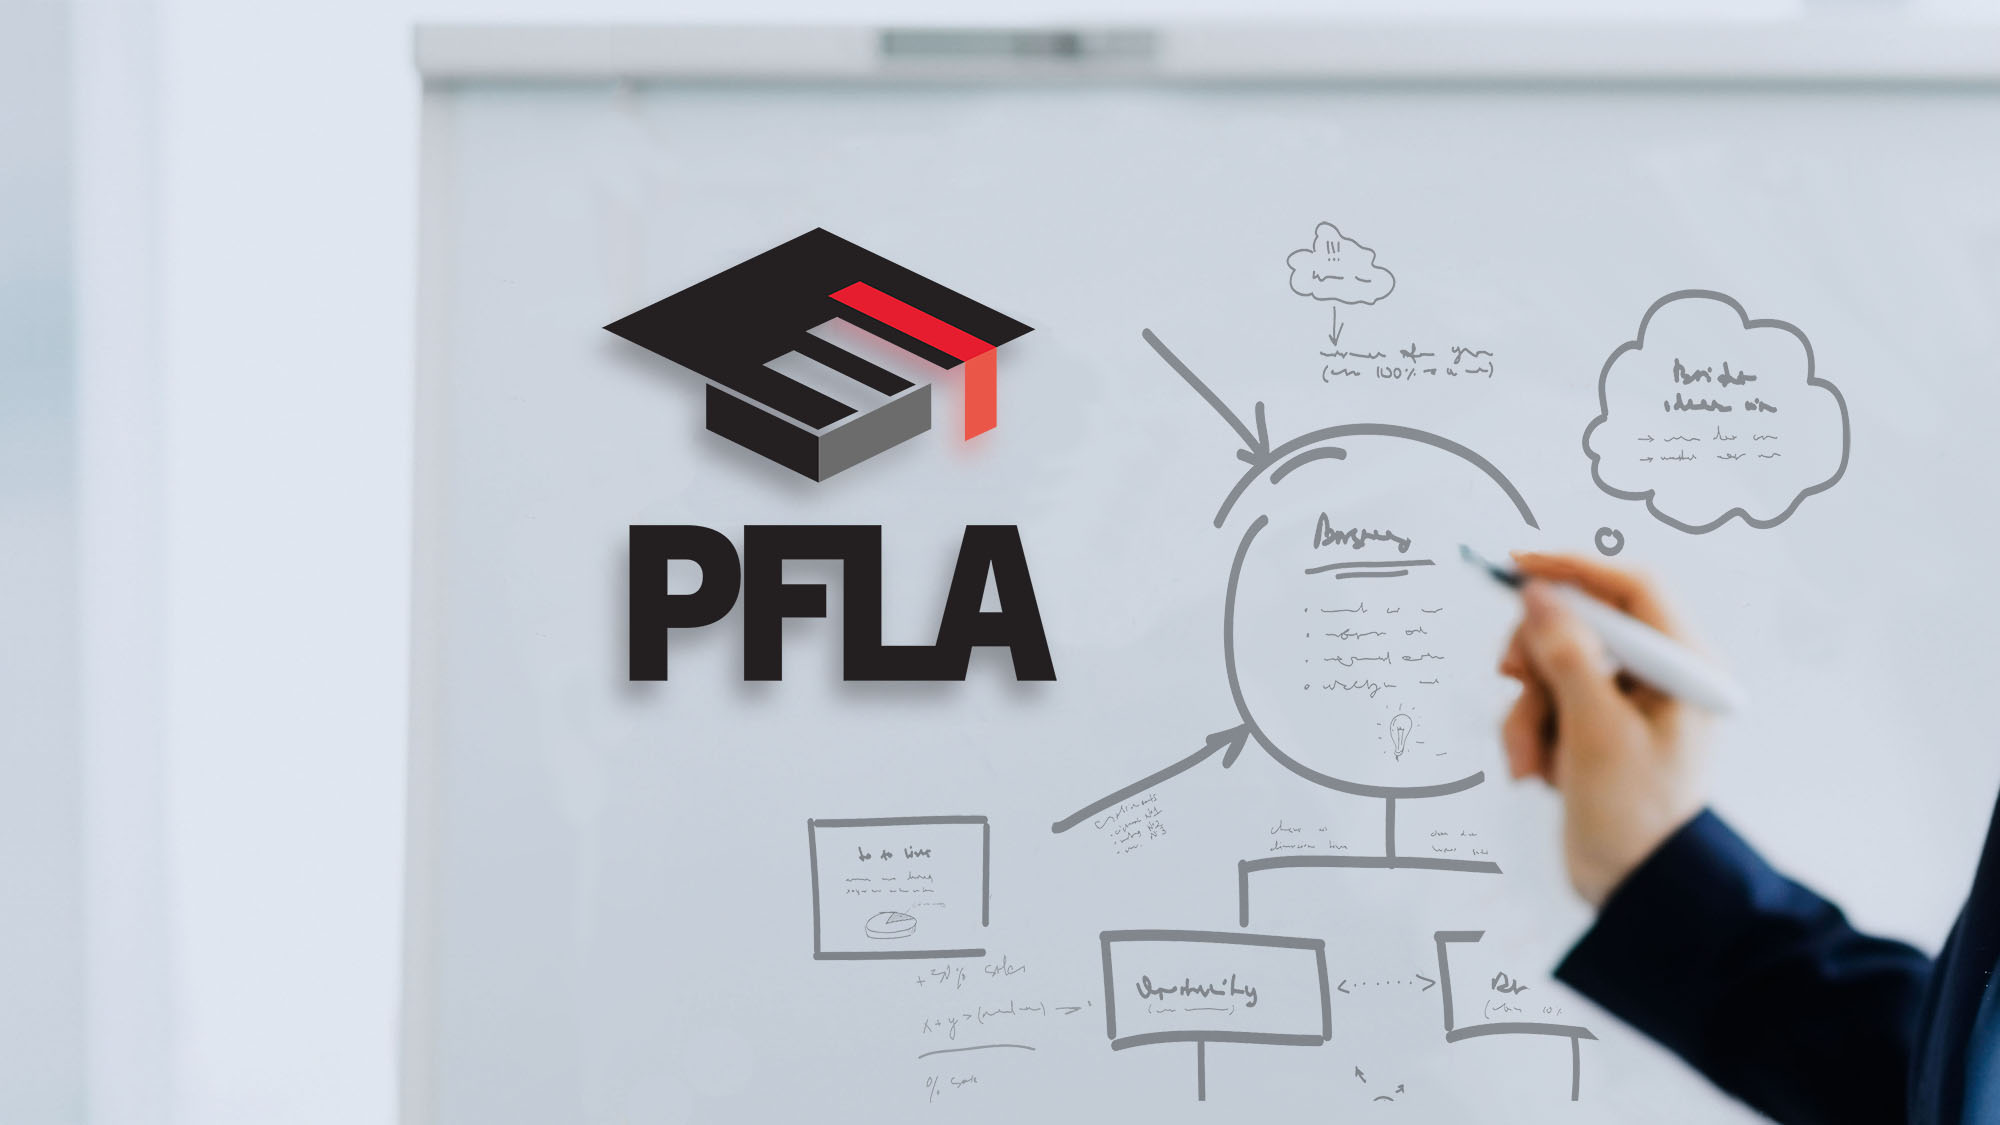 PFLA logo on presentation board with financial drawings in background